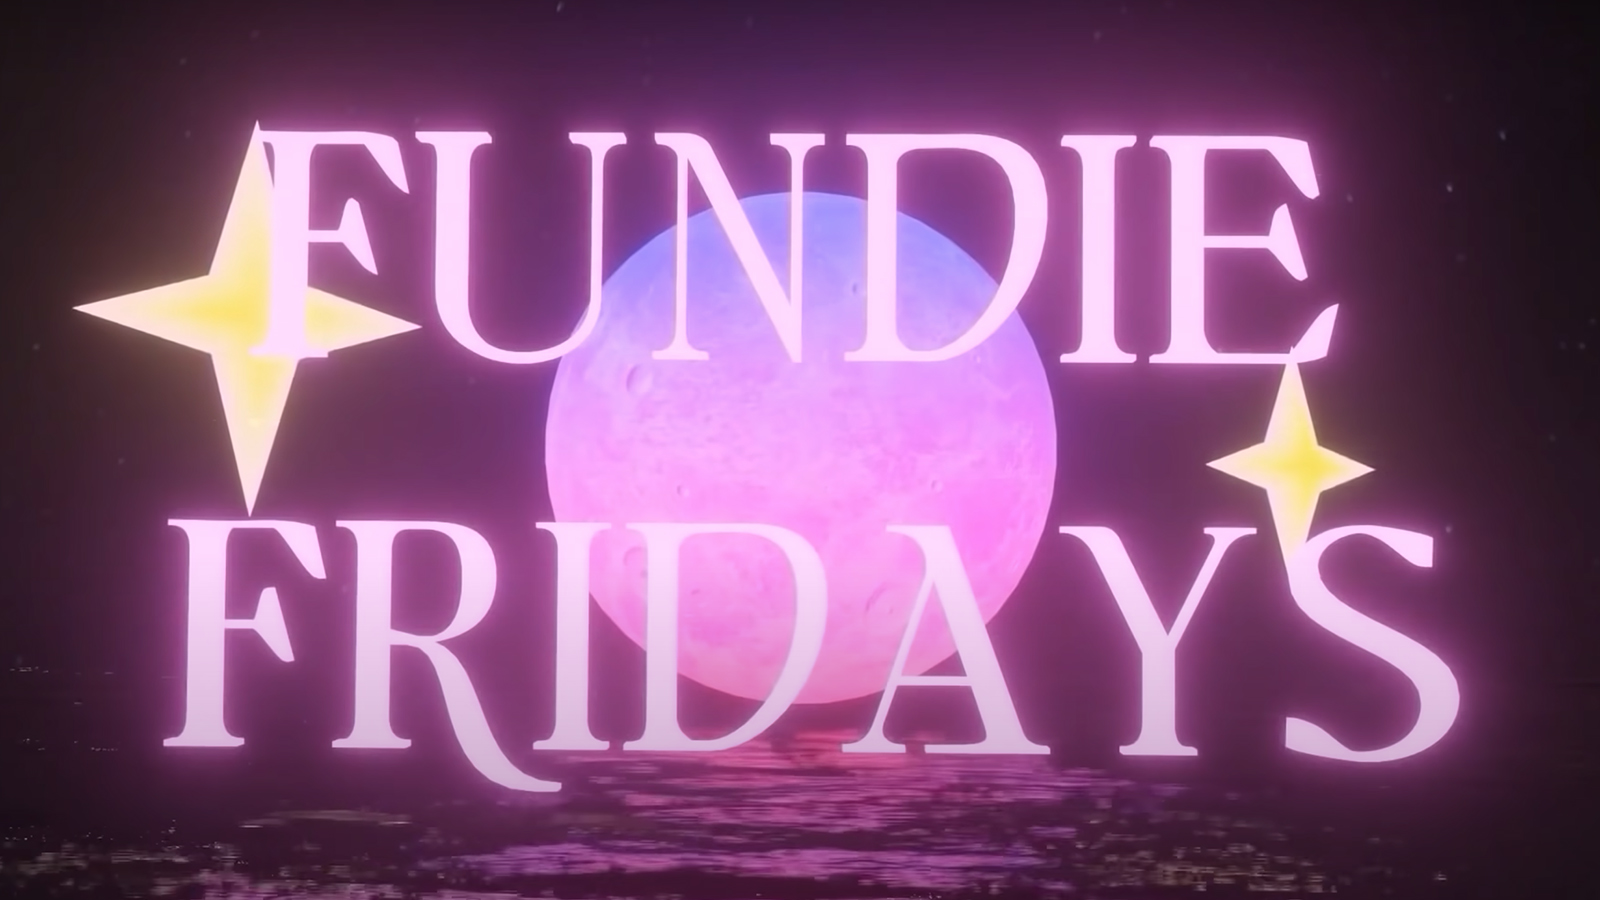 A Fundie Fridays episode intro. Video screen grab